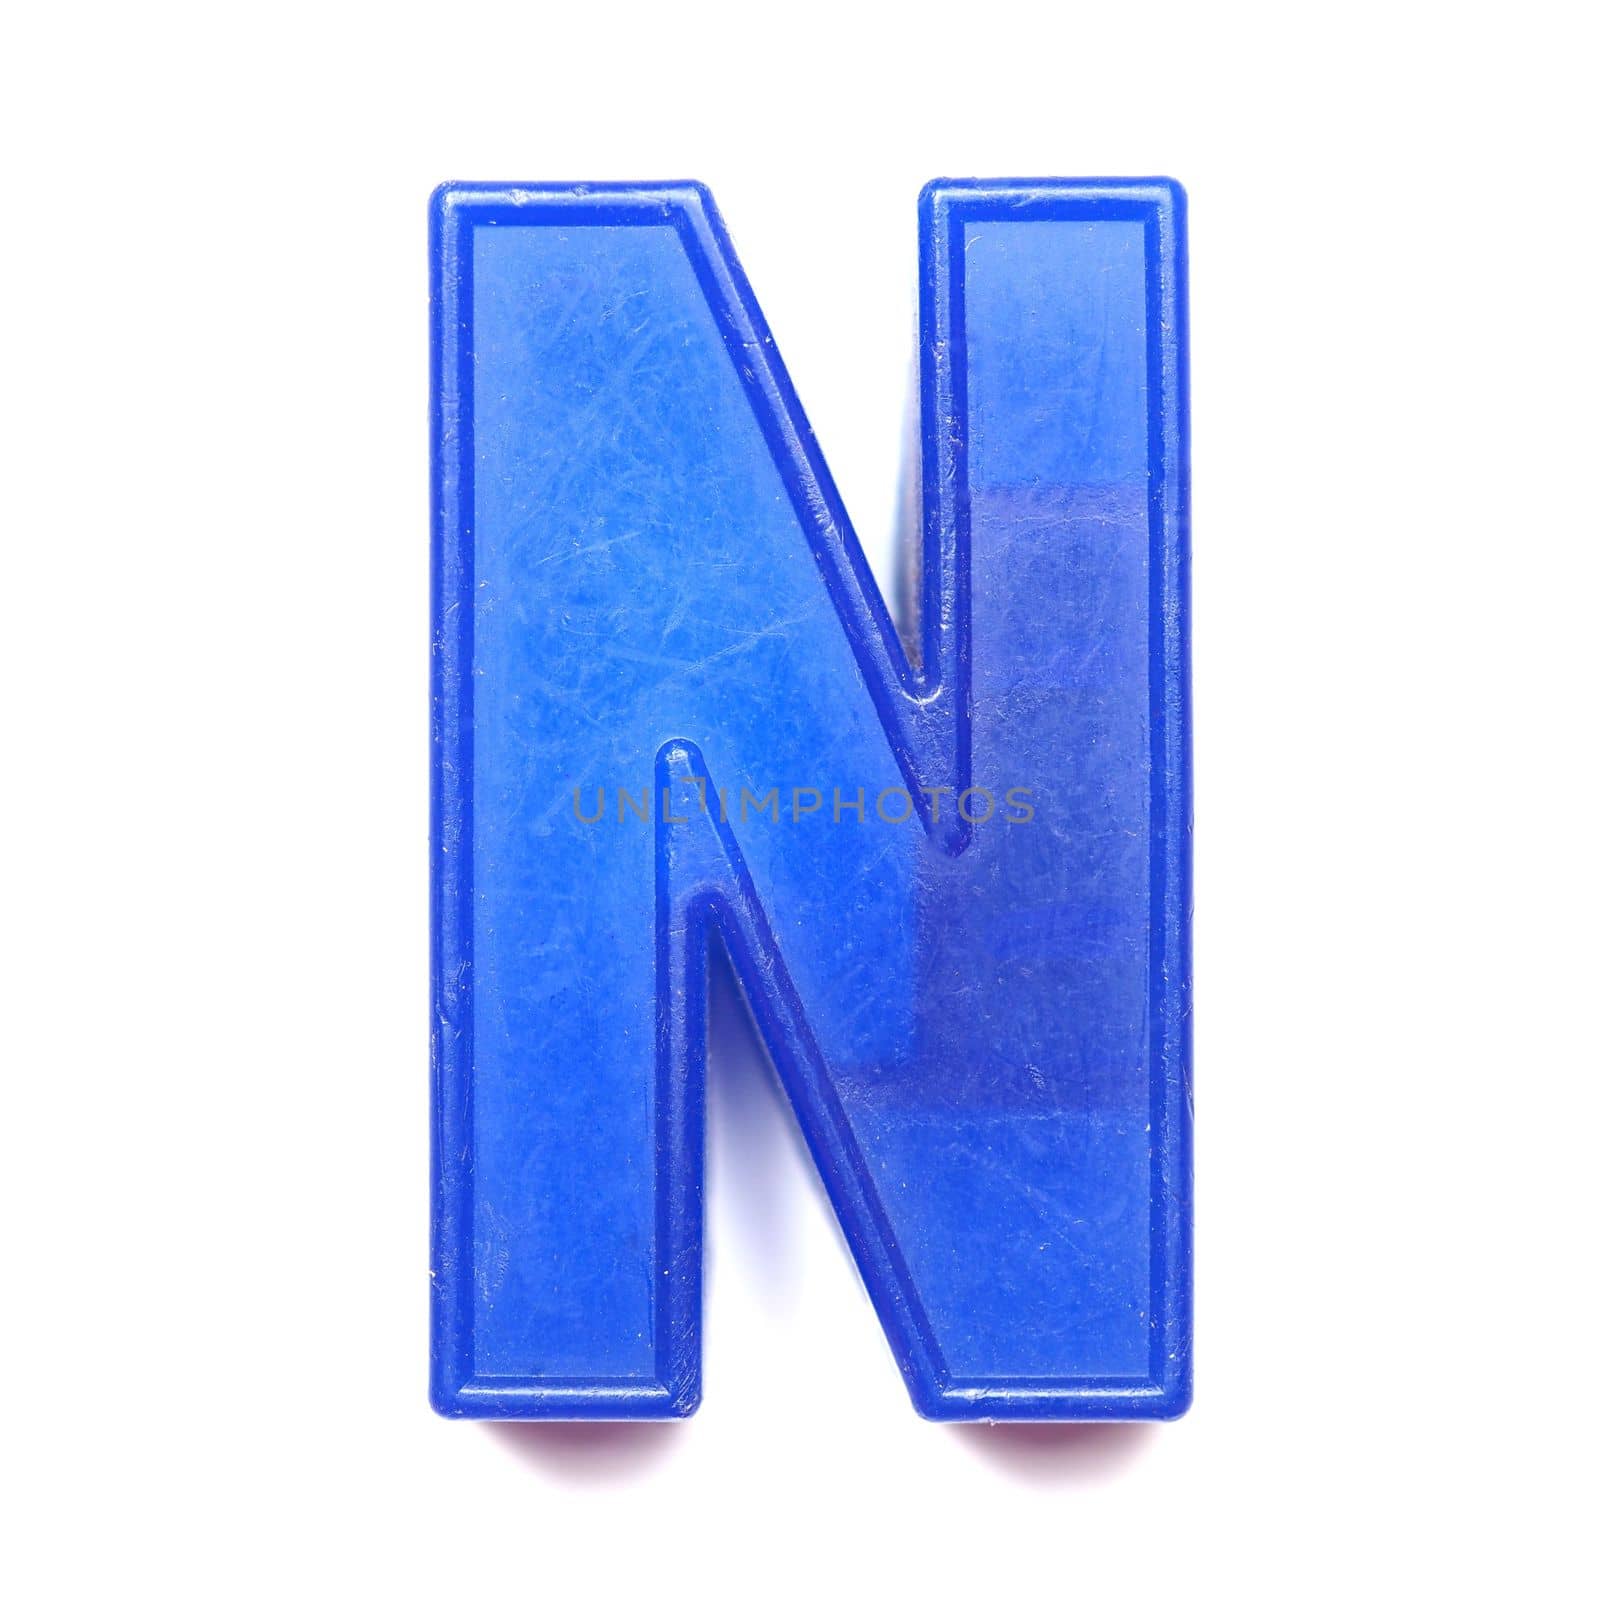 Magnetic uppercase letter N by claudiodivizia